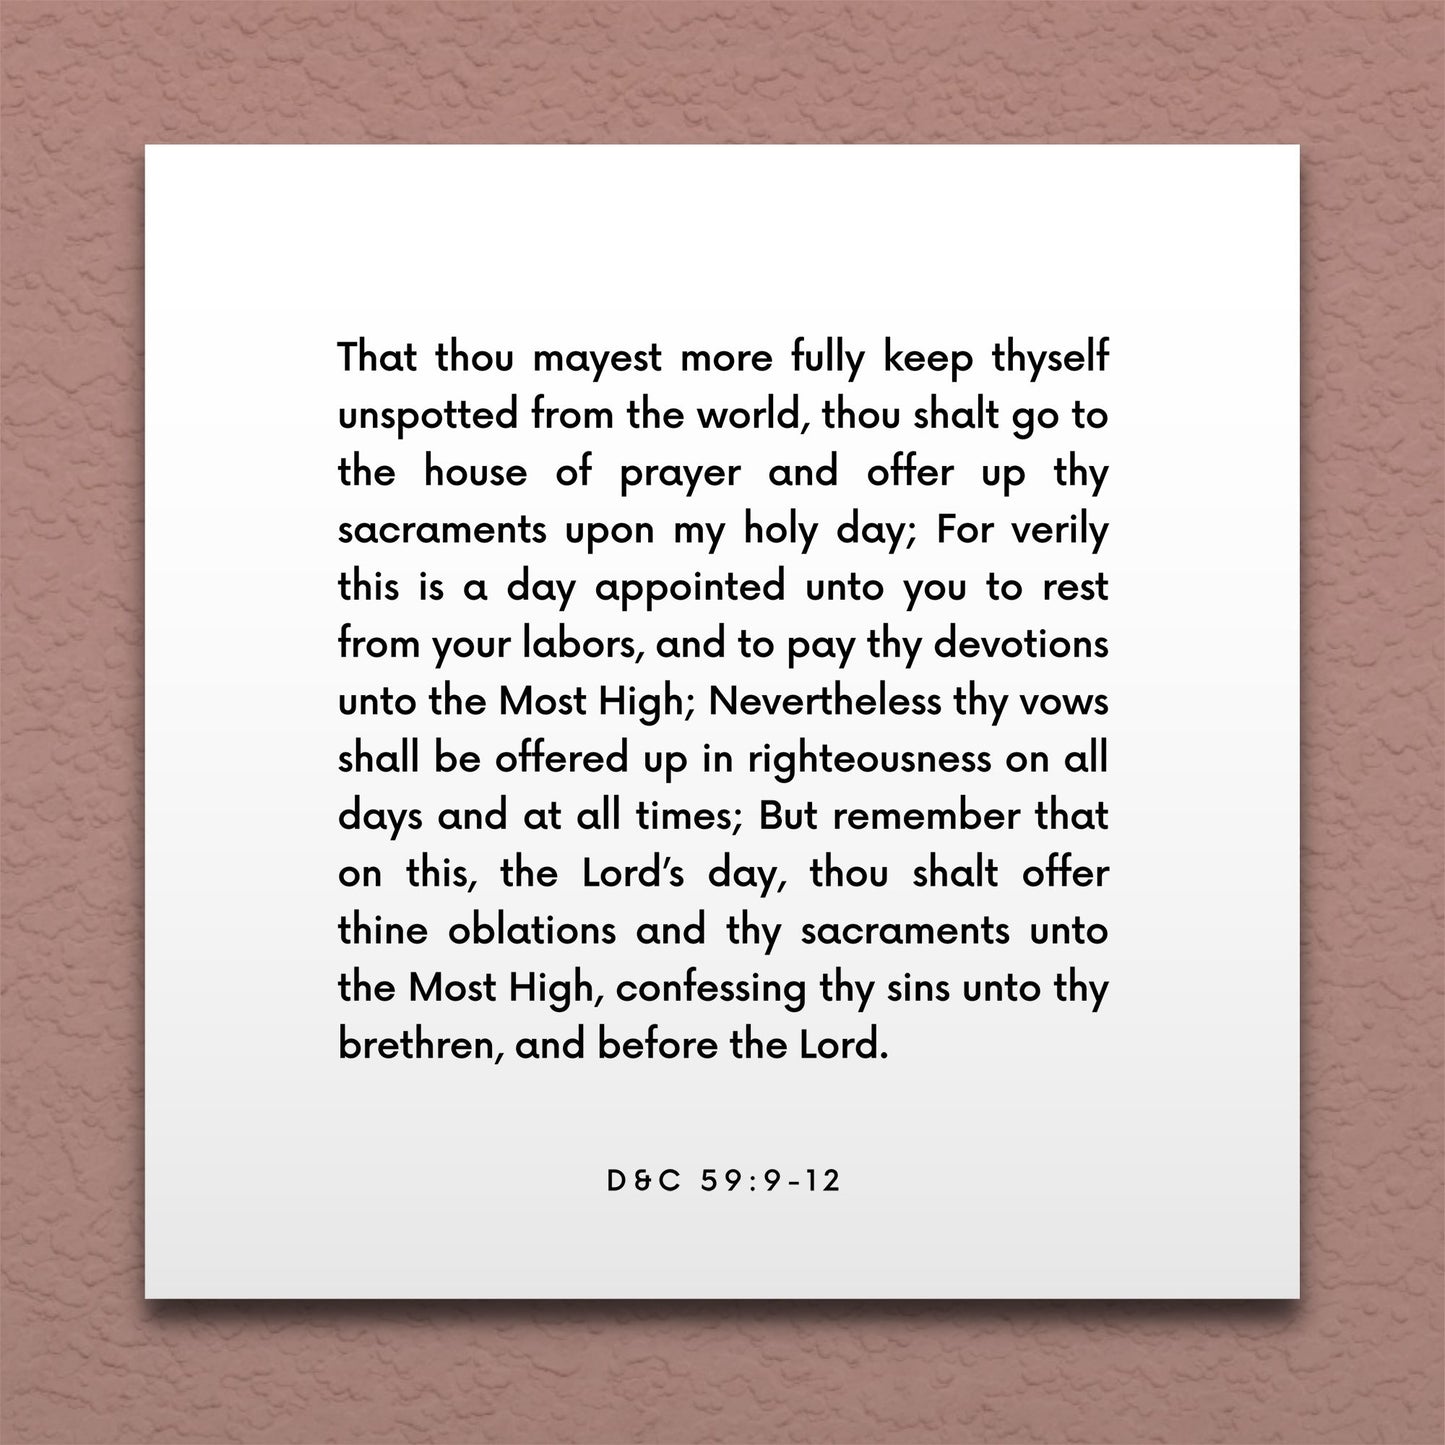 Wall-mounted scripture tile for D&C 59:9-12 - "On this, the Lord's day, thou shalt offer thy sacraments"